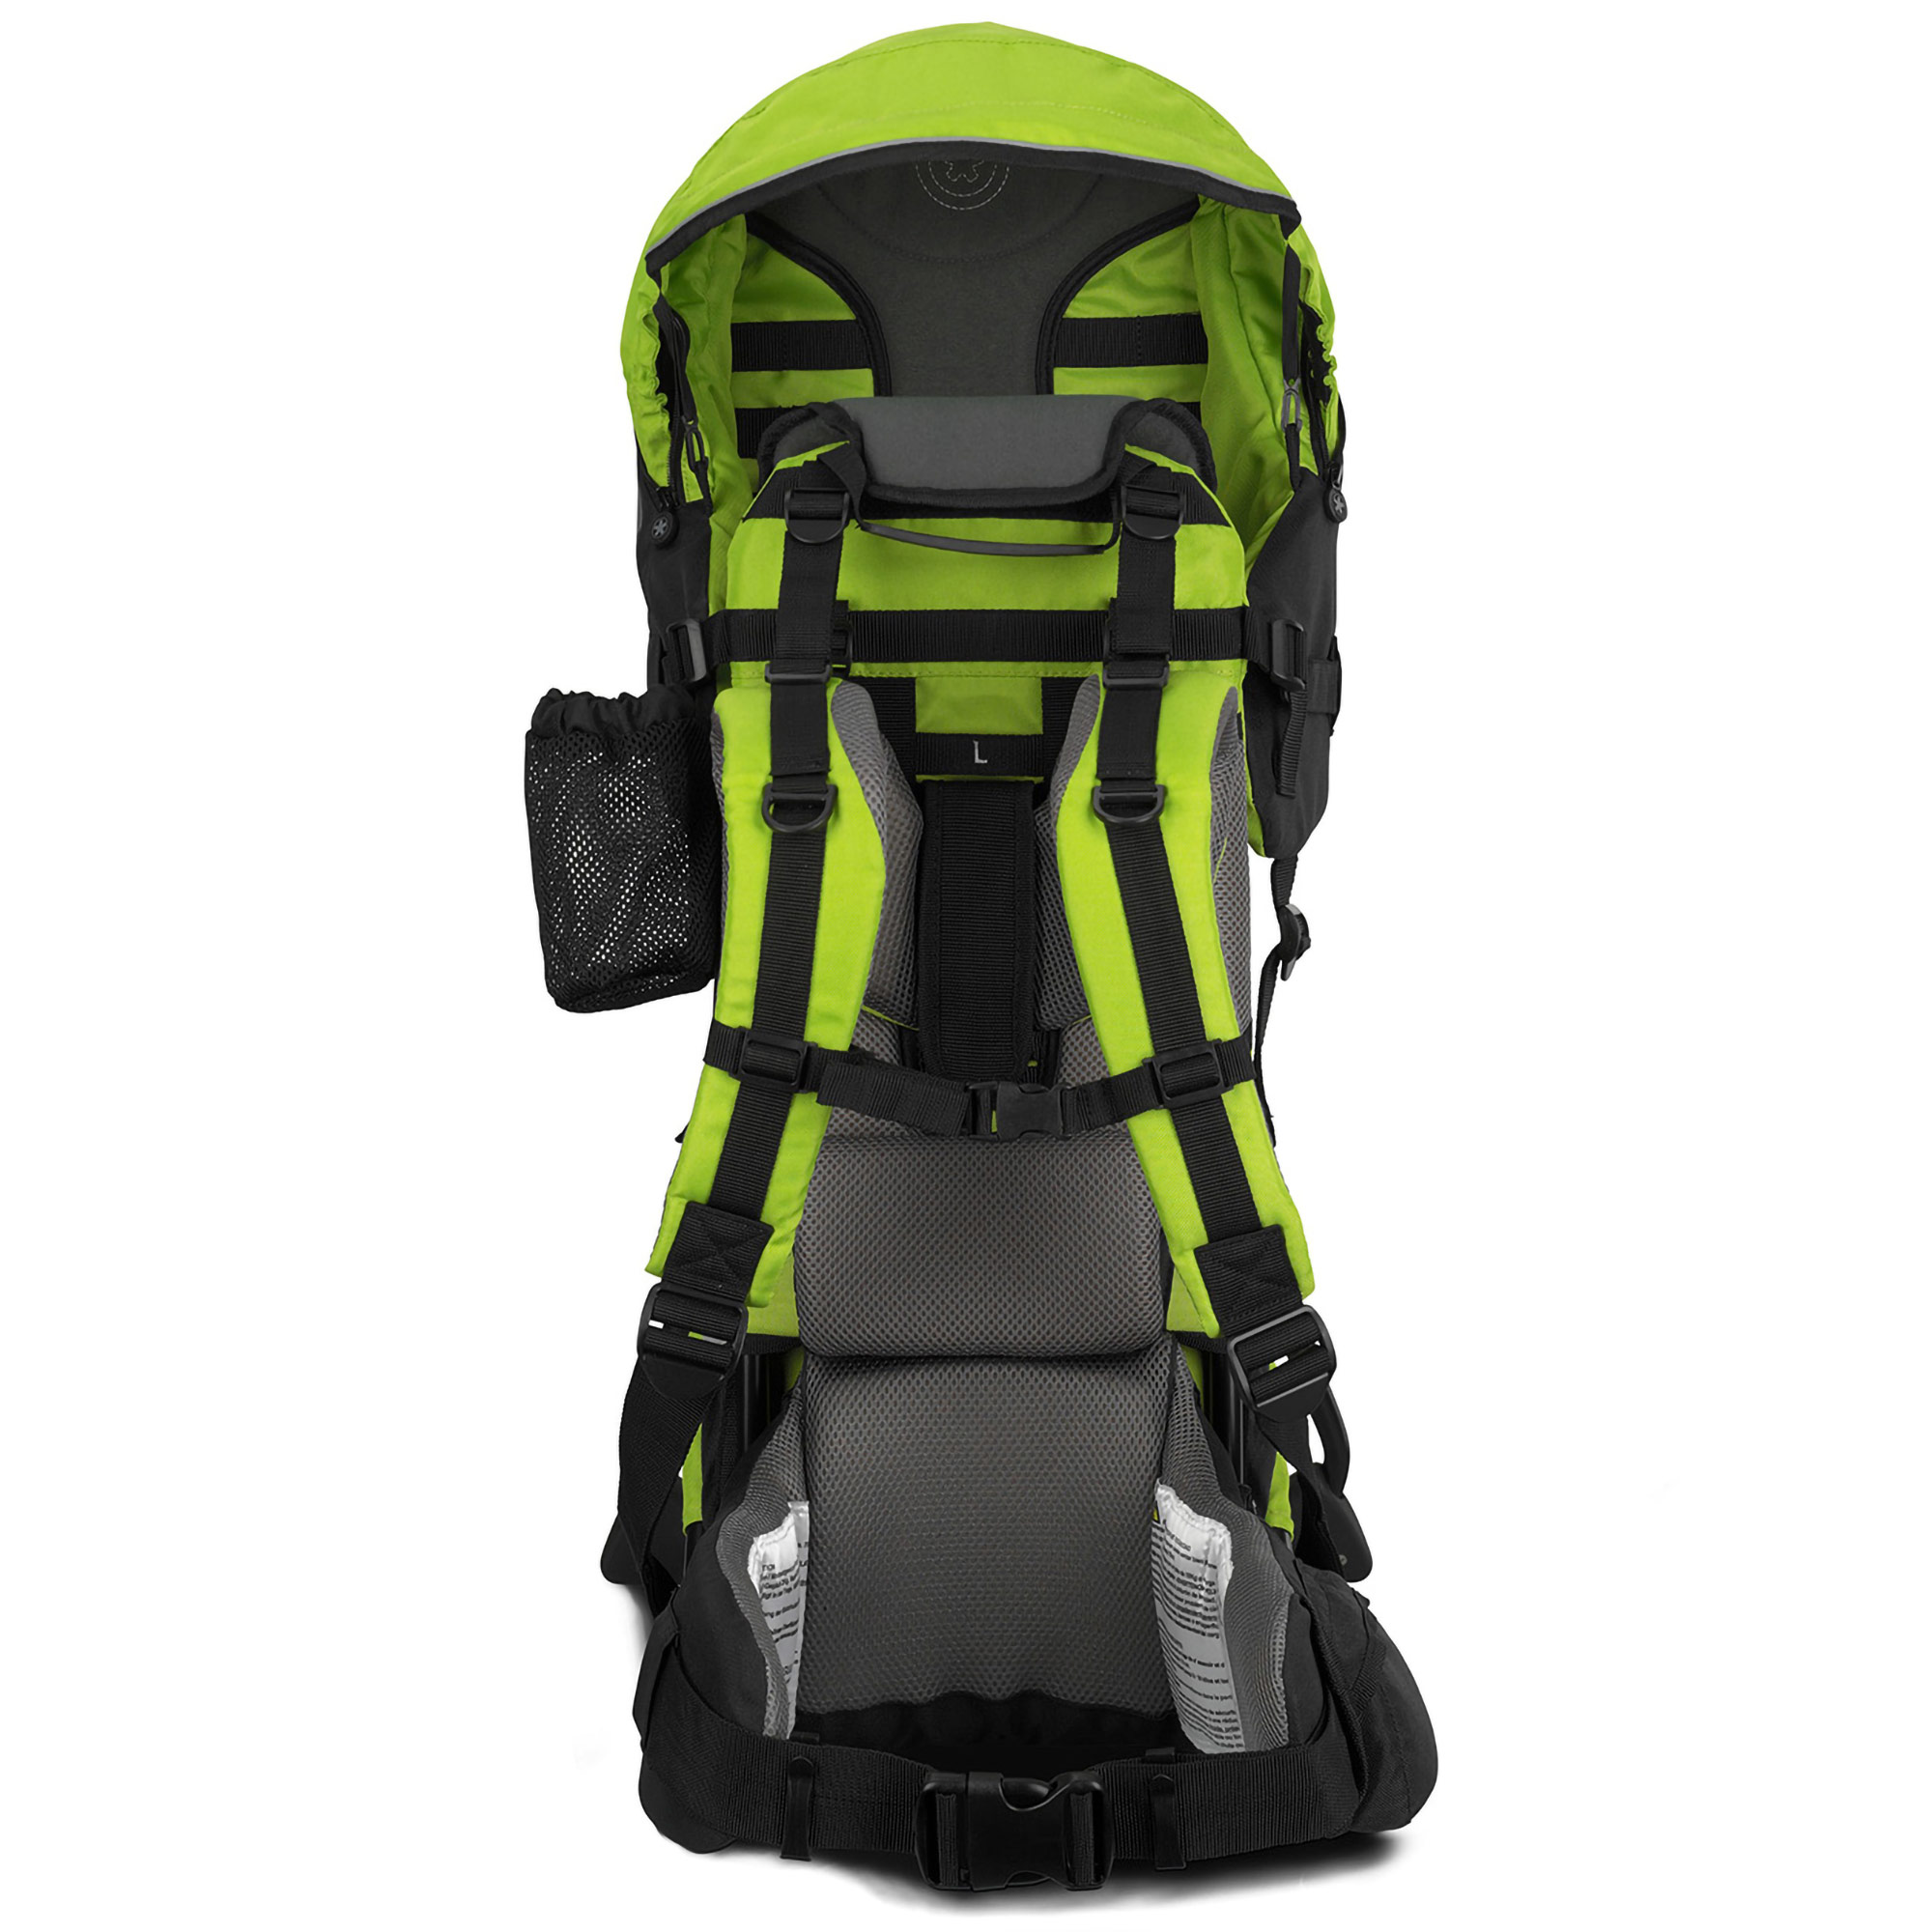 kiddy baby carrier